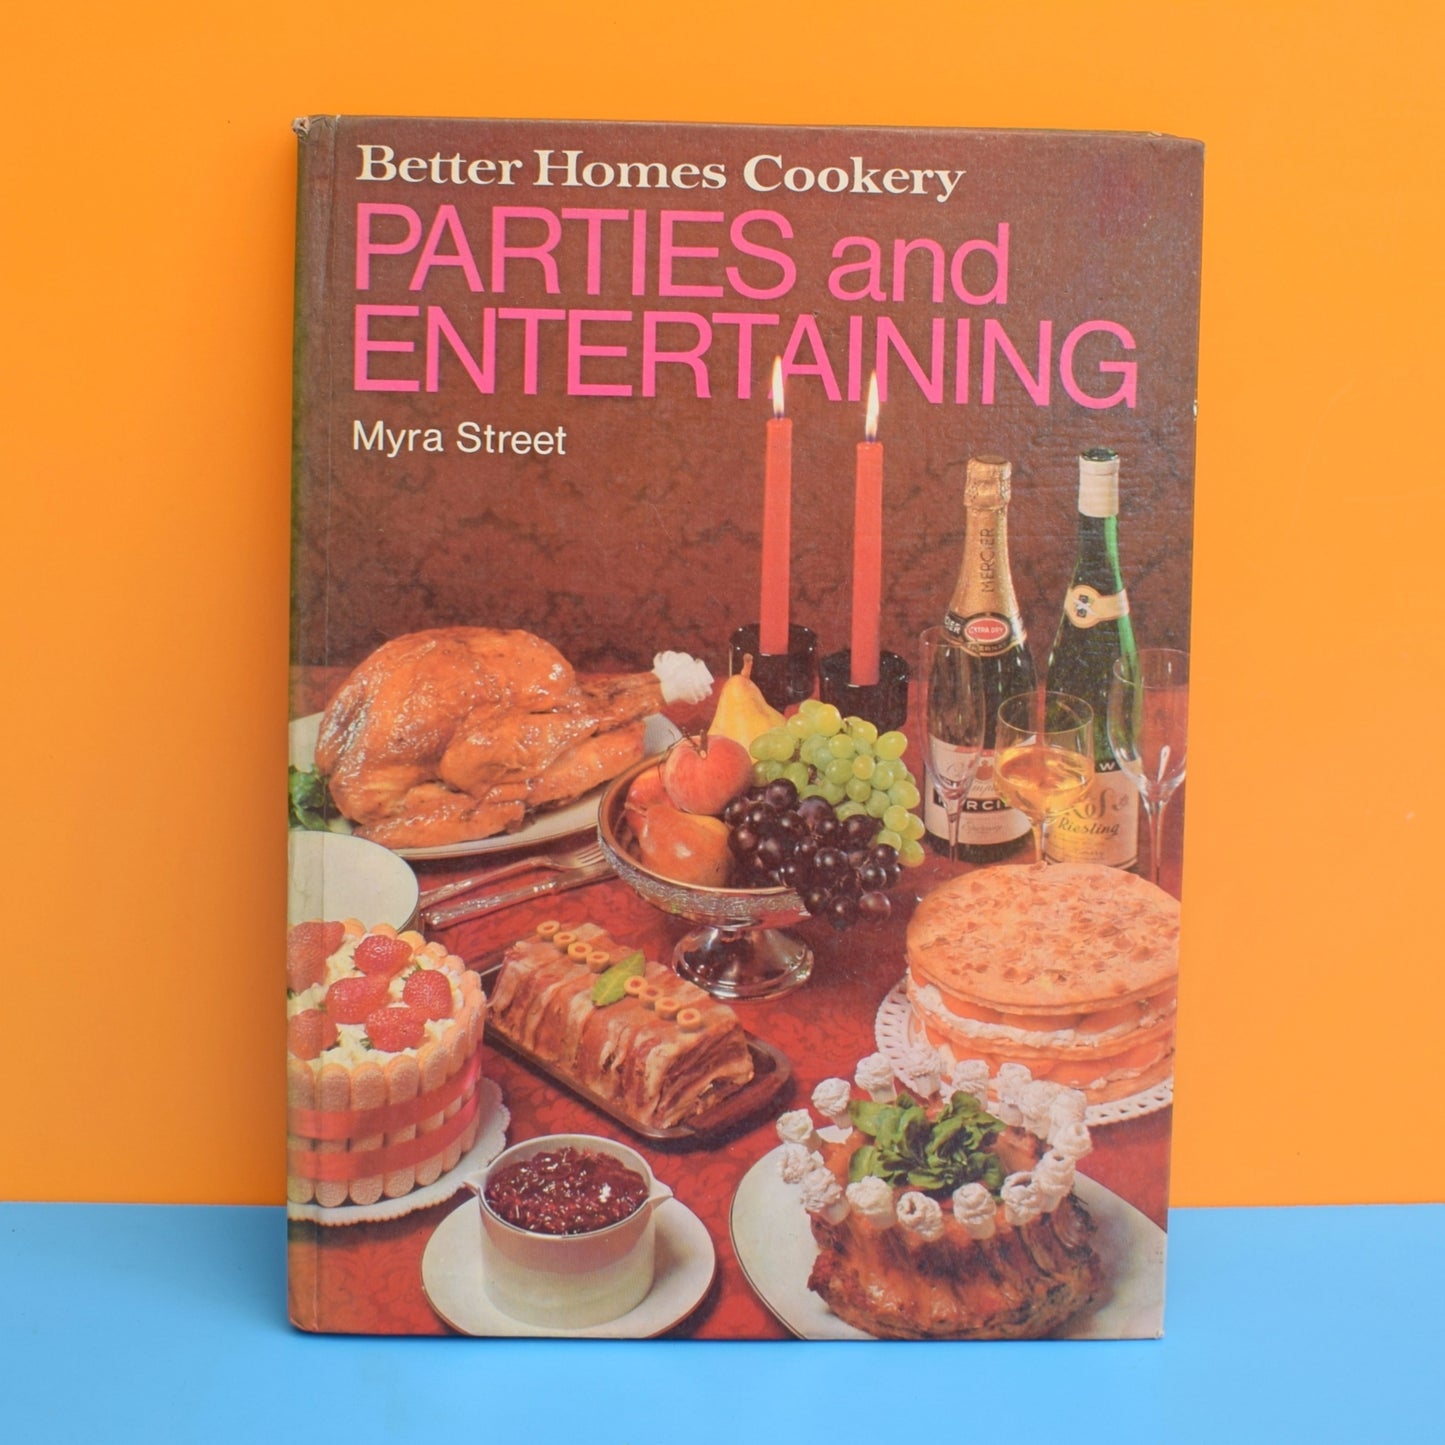 Vintage 1970s Book - Parties and Entertaining